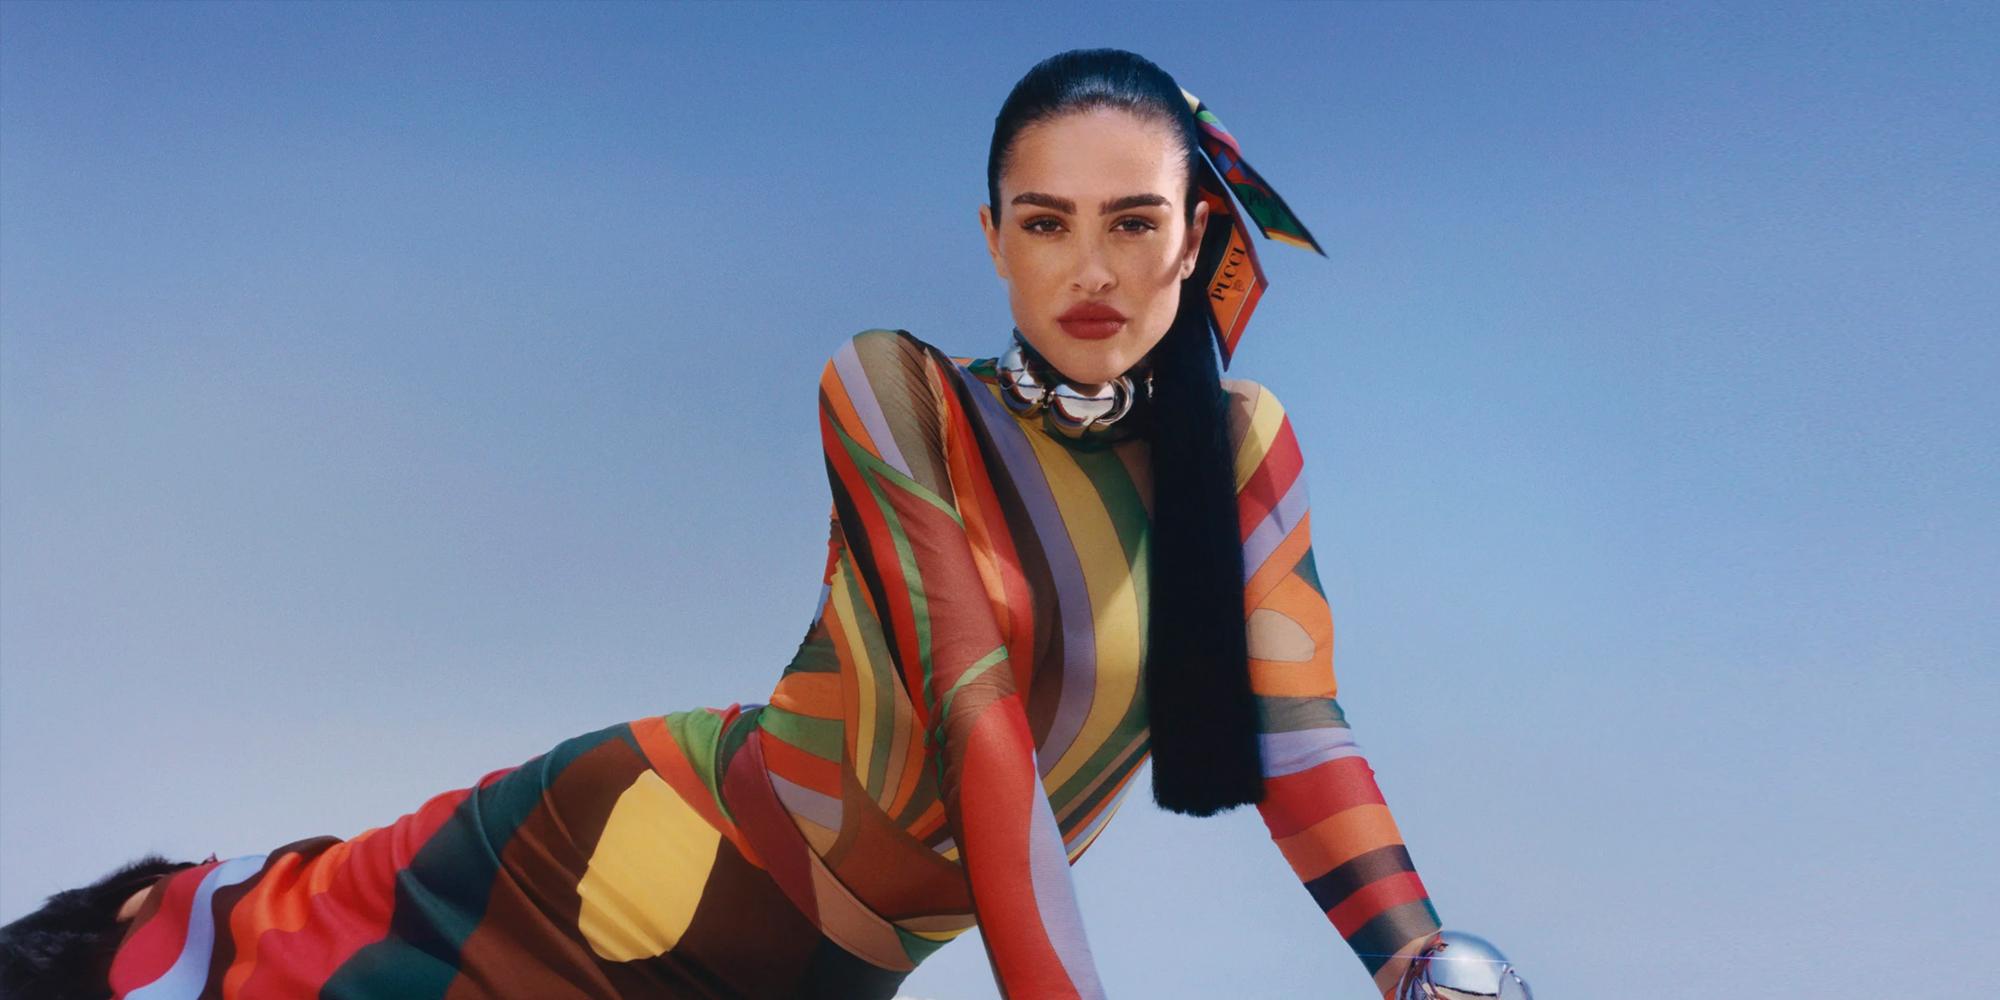 SHOP THE EMILIO PUCCI FALL 2023 RTW COLLECTION